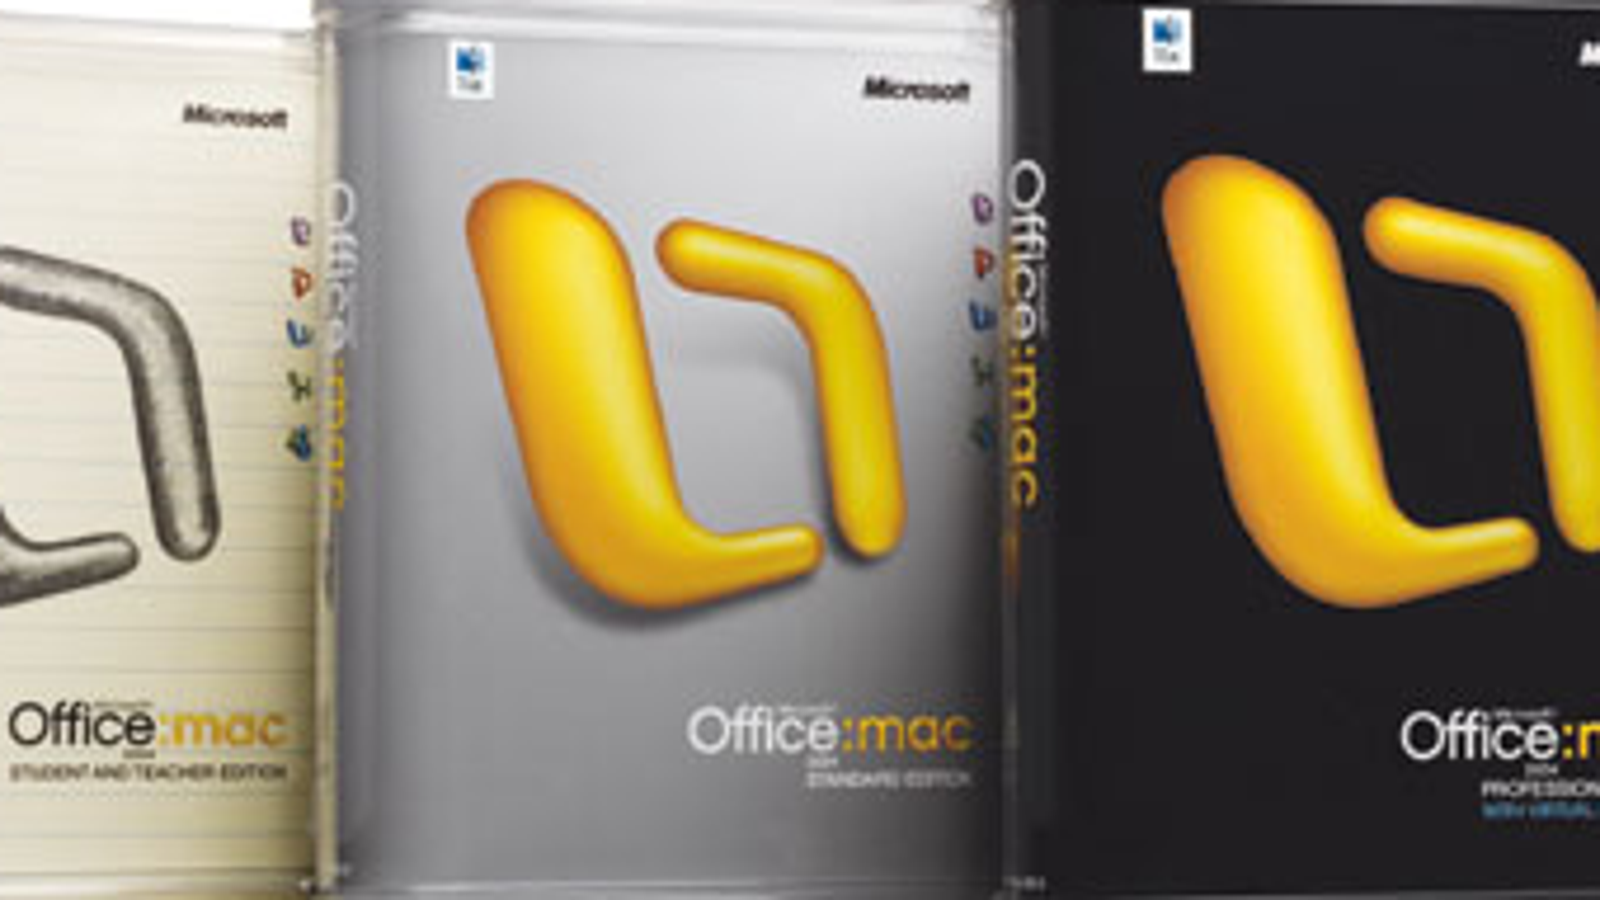 upgrade office for mac 2011 to 2019